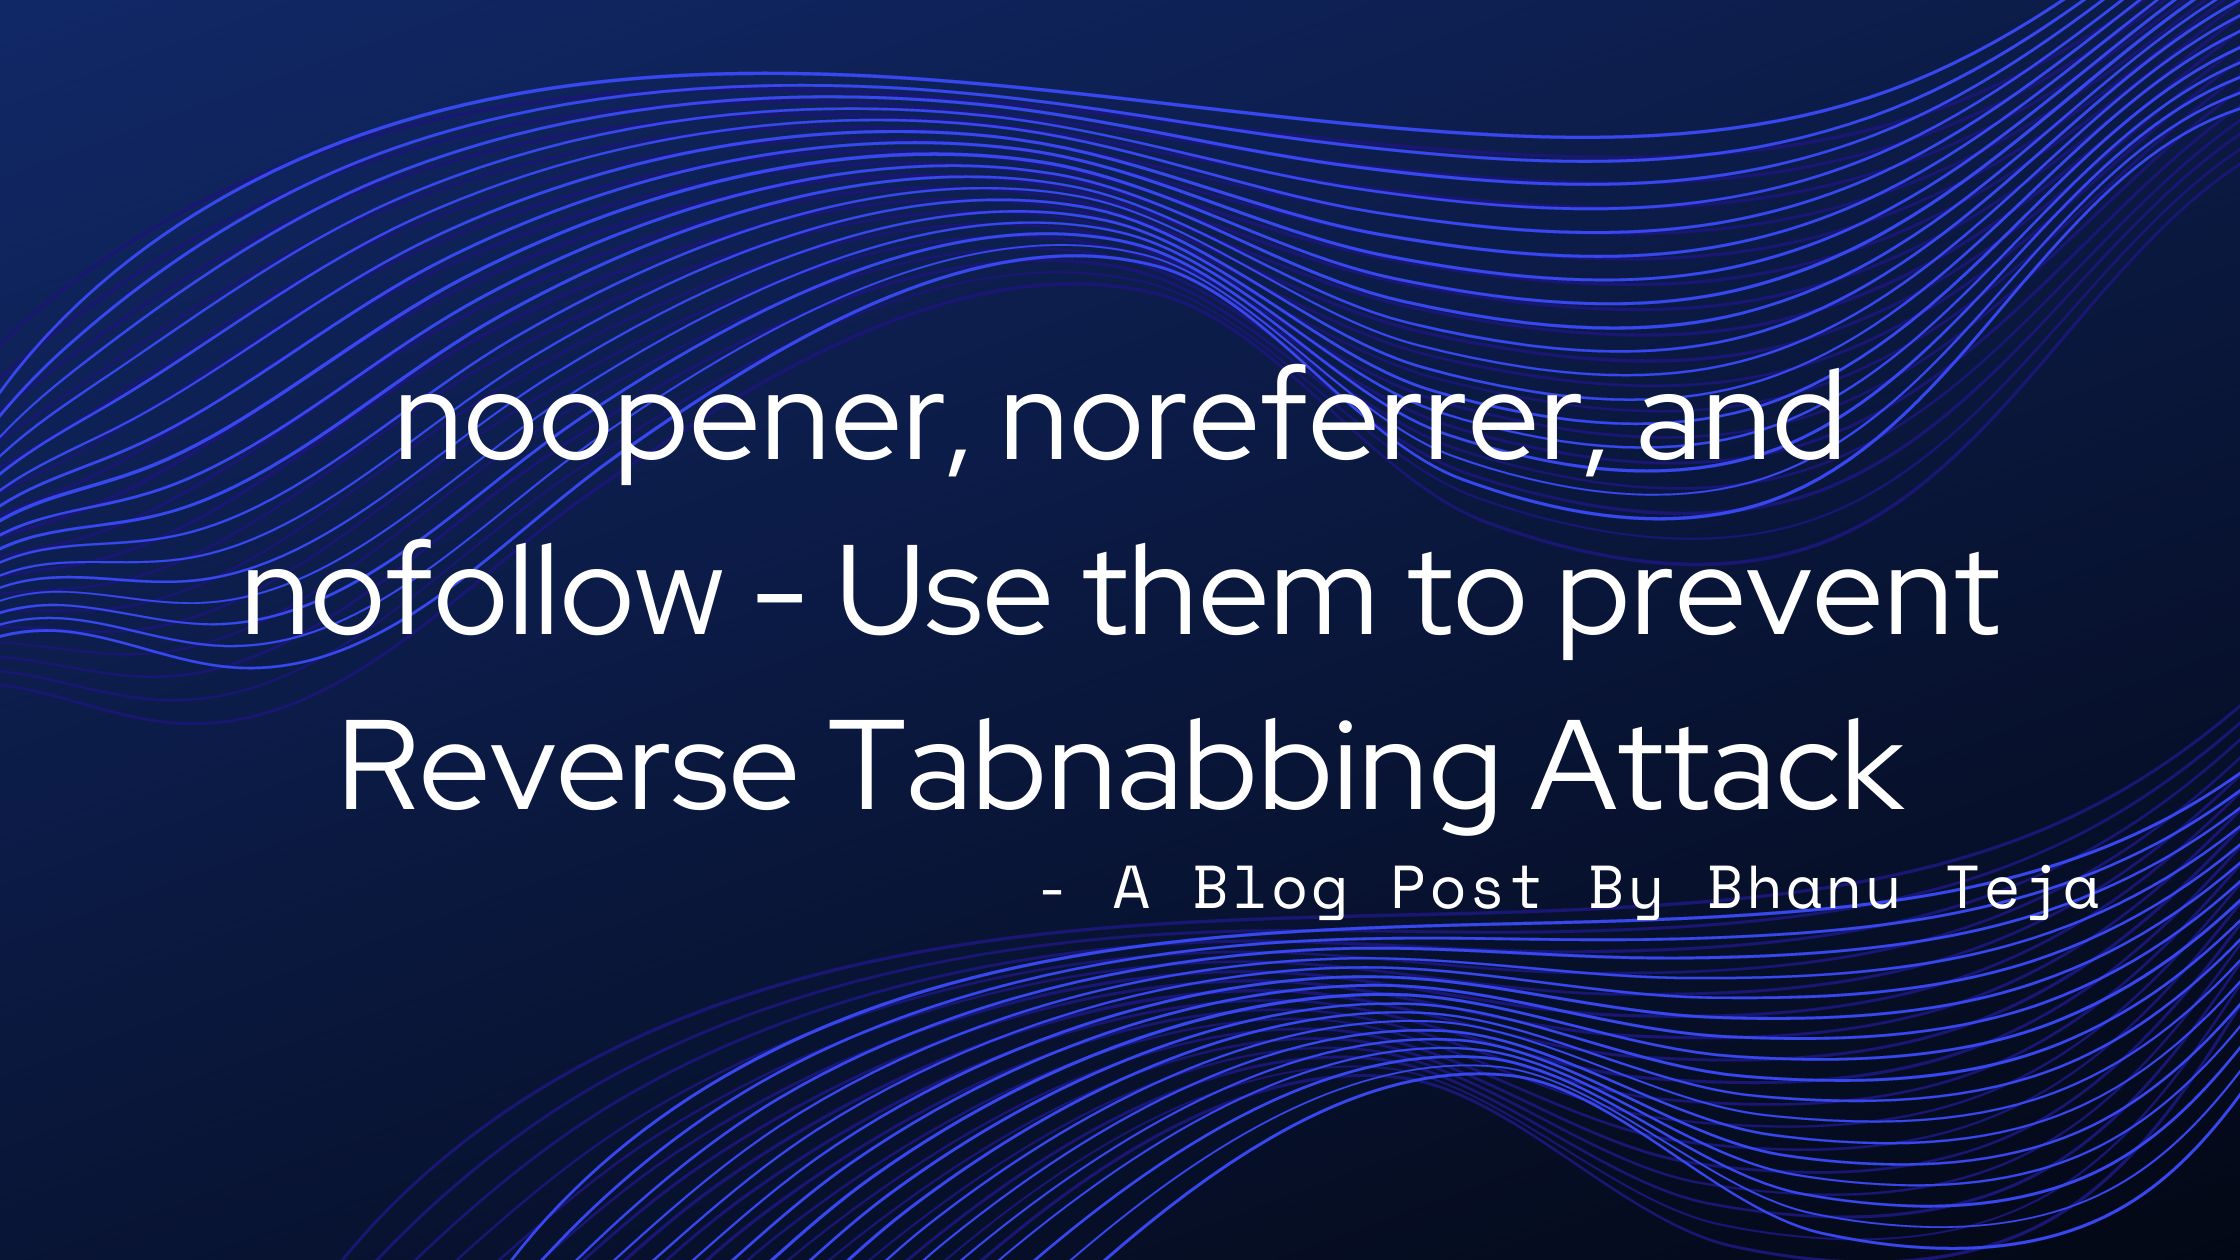 featured image - Prevent Reverse Tabnabbing Attacks With Proper noopener, noreferrer, and nofollow Attribution